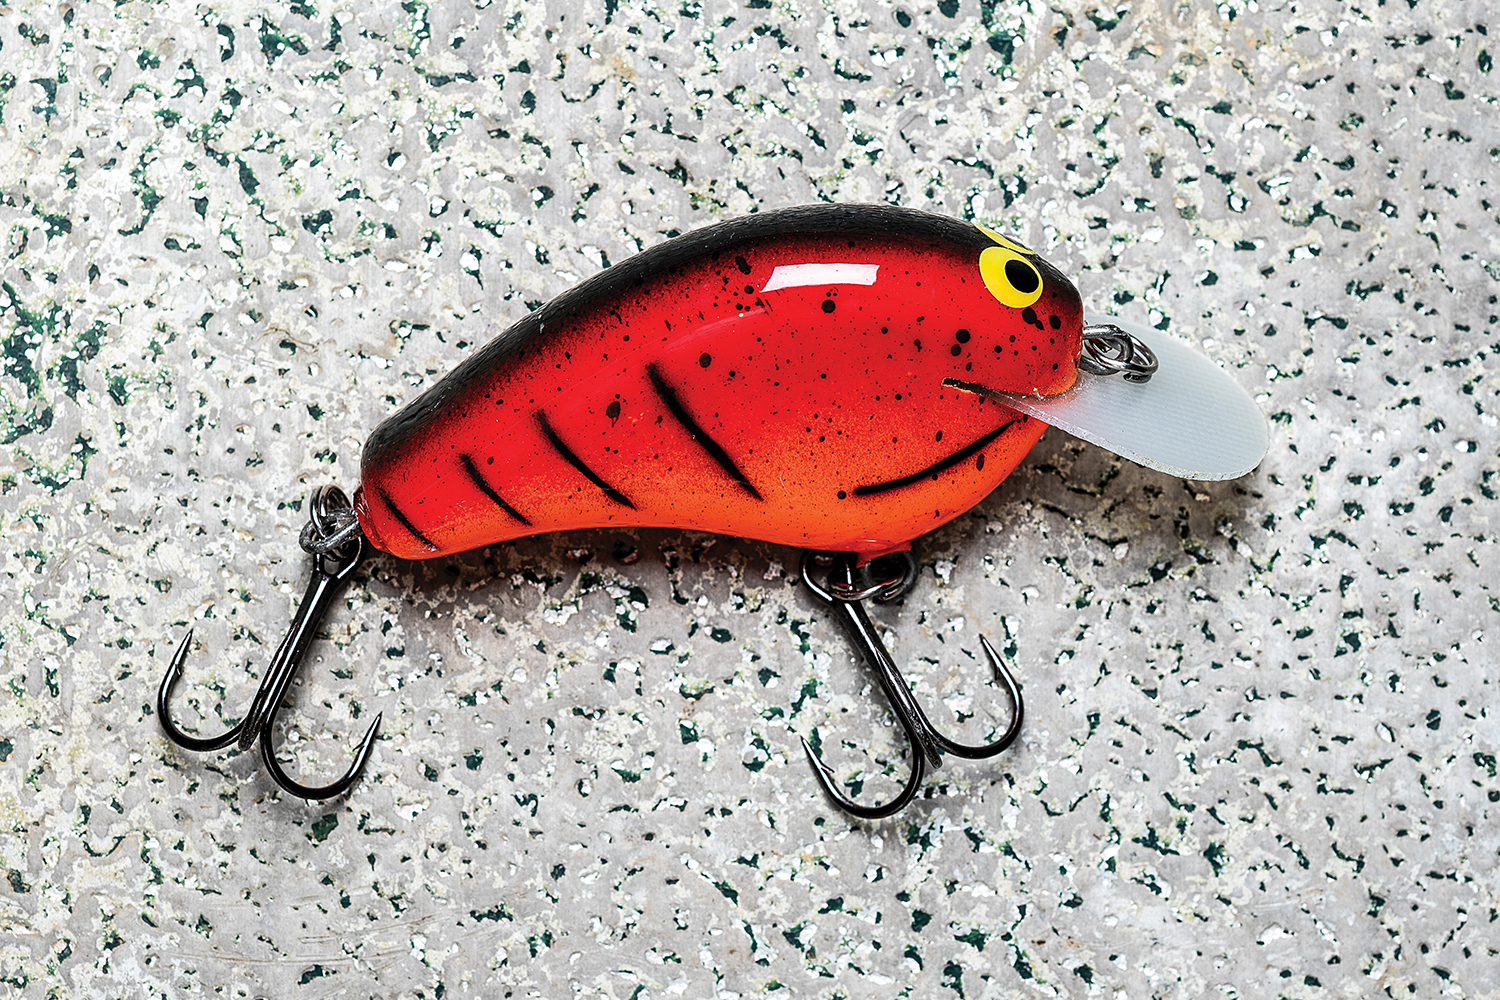 close-up of single, finished red crankbait